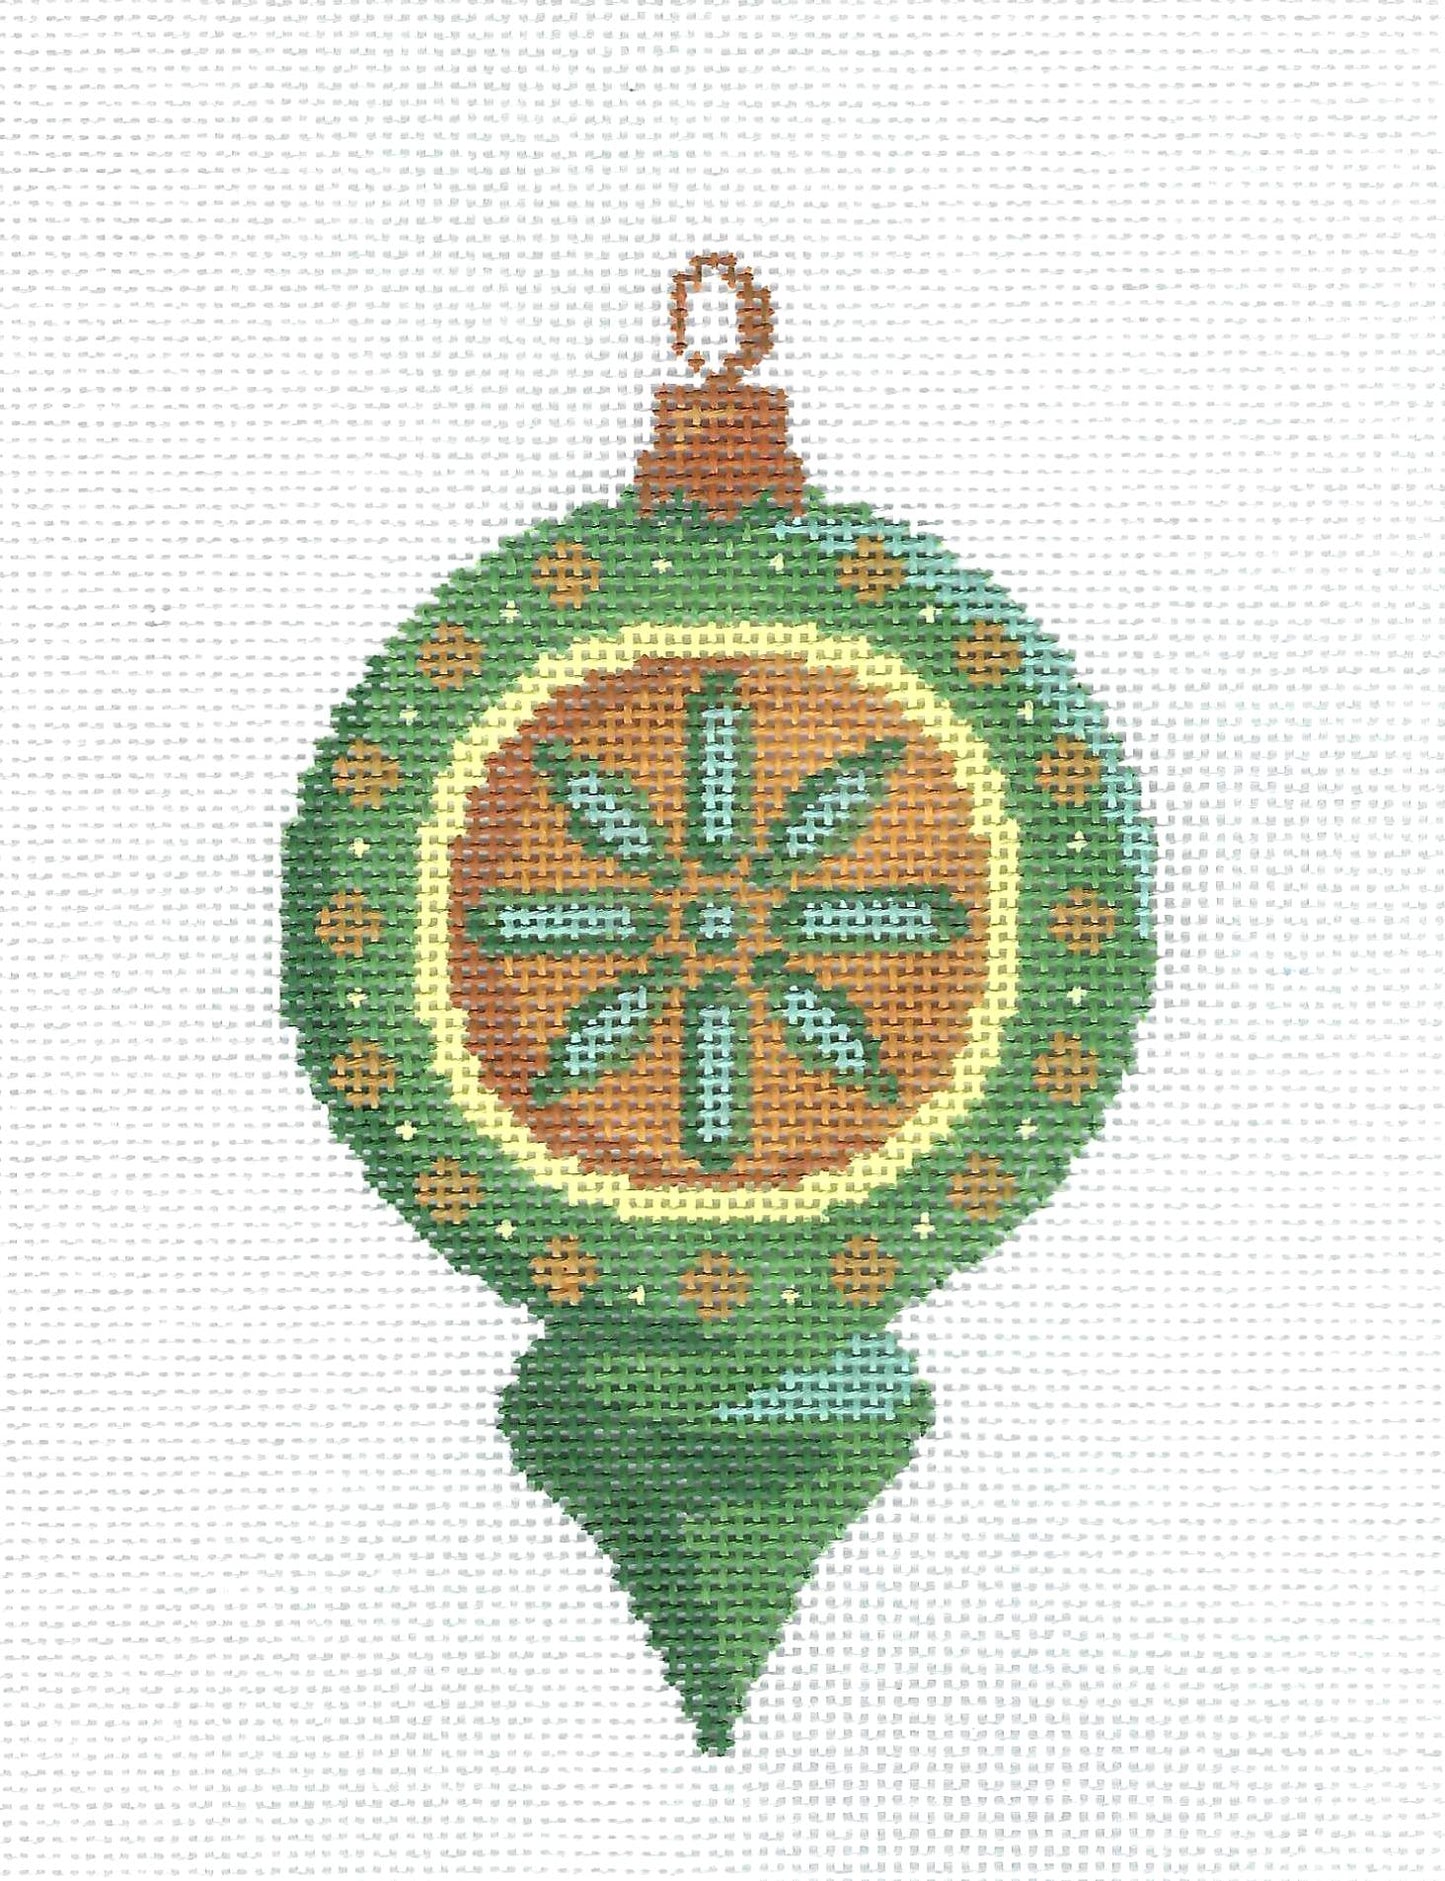 Green & Yellow handpainted Needlepoint Ornament Canvas by Abigail Cecile from PLD